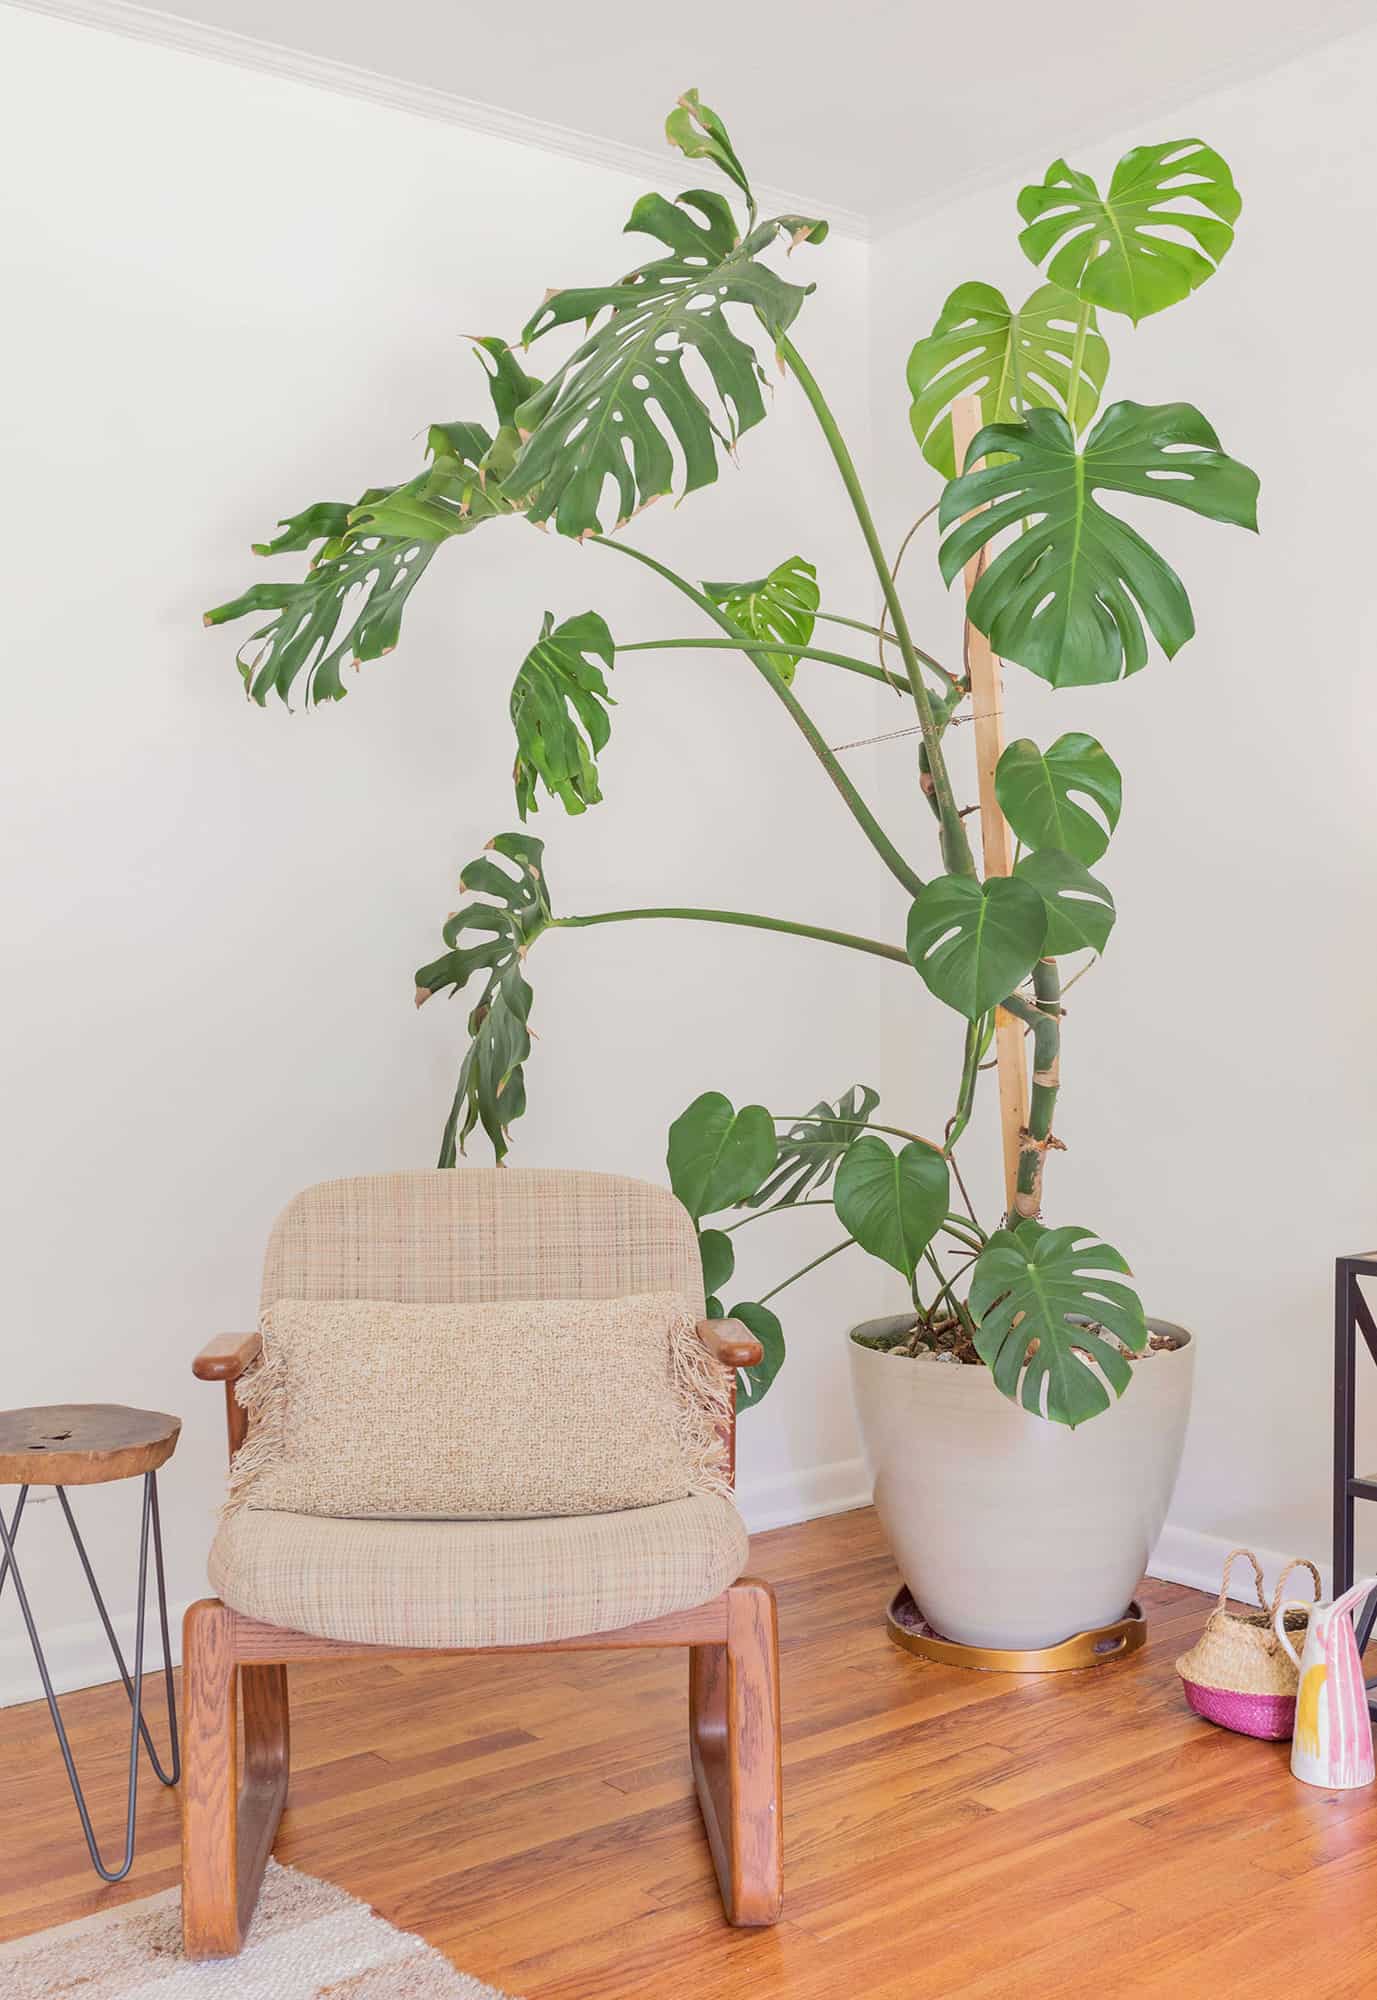 a monstera plant in the corner by a tan chair